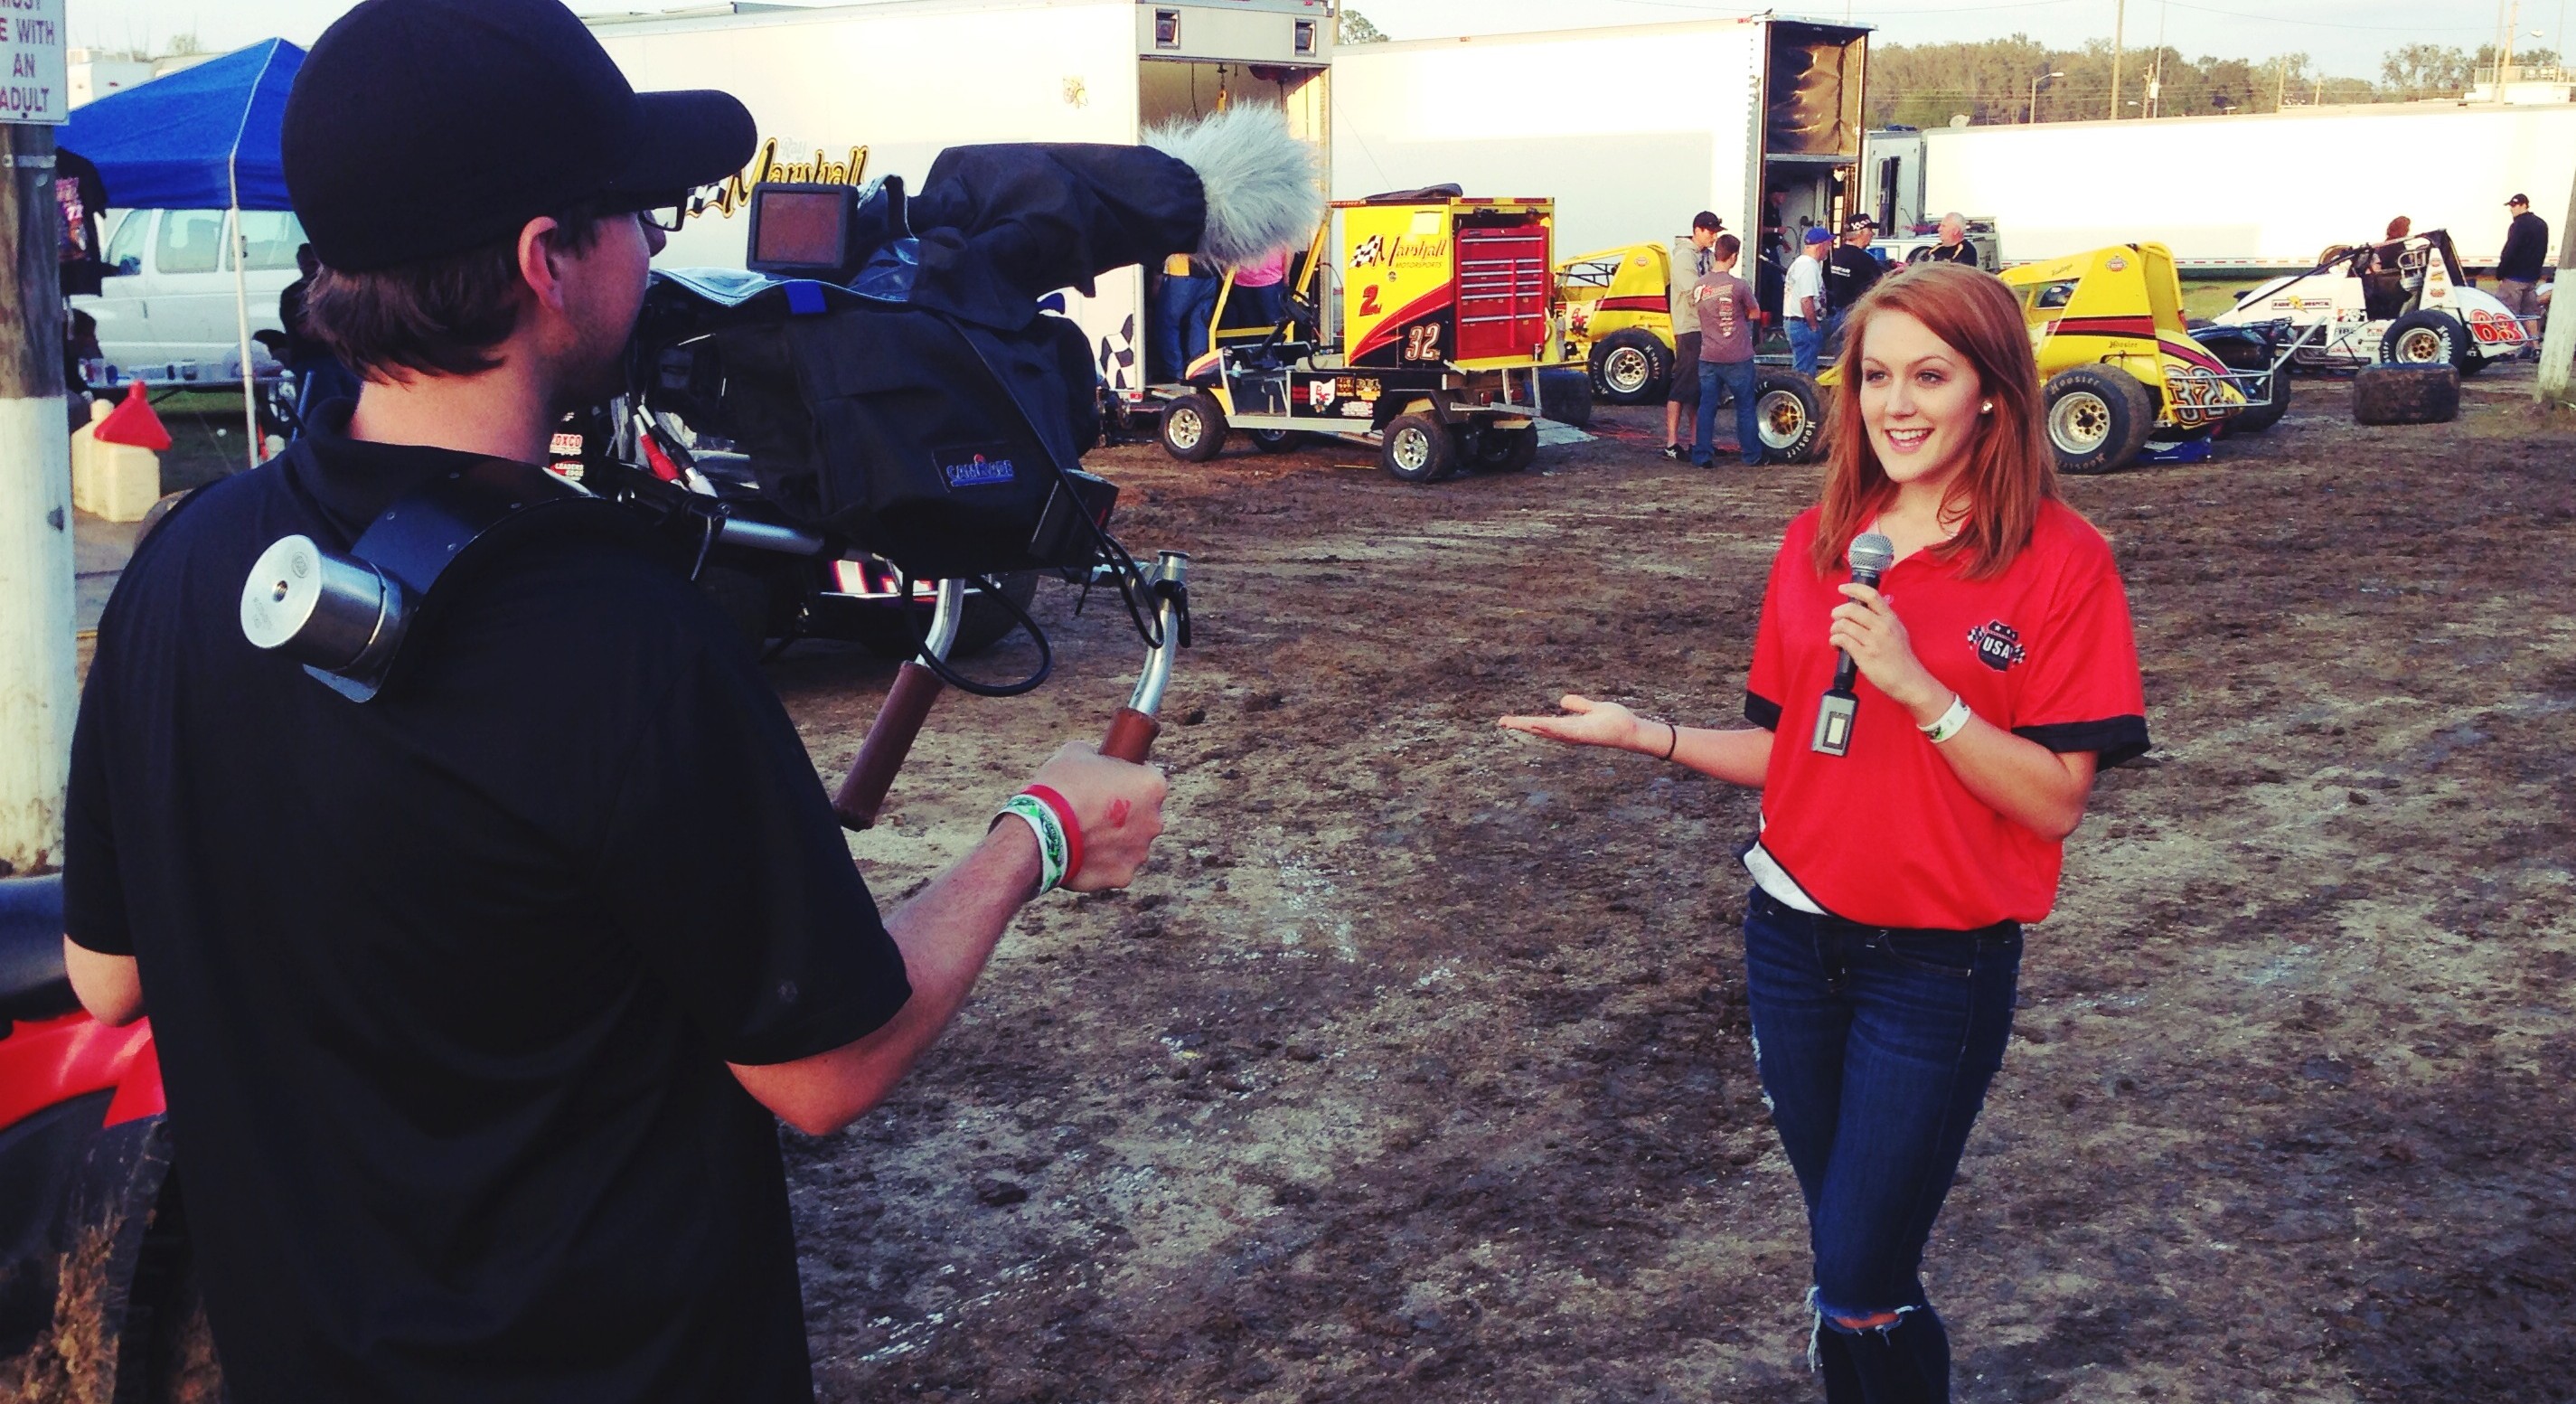 Tori Petry pit reports for the USAC races in Ocala in 2014